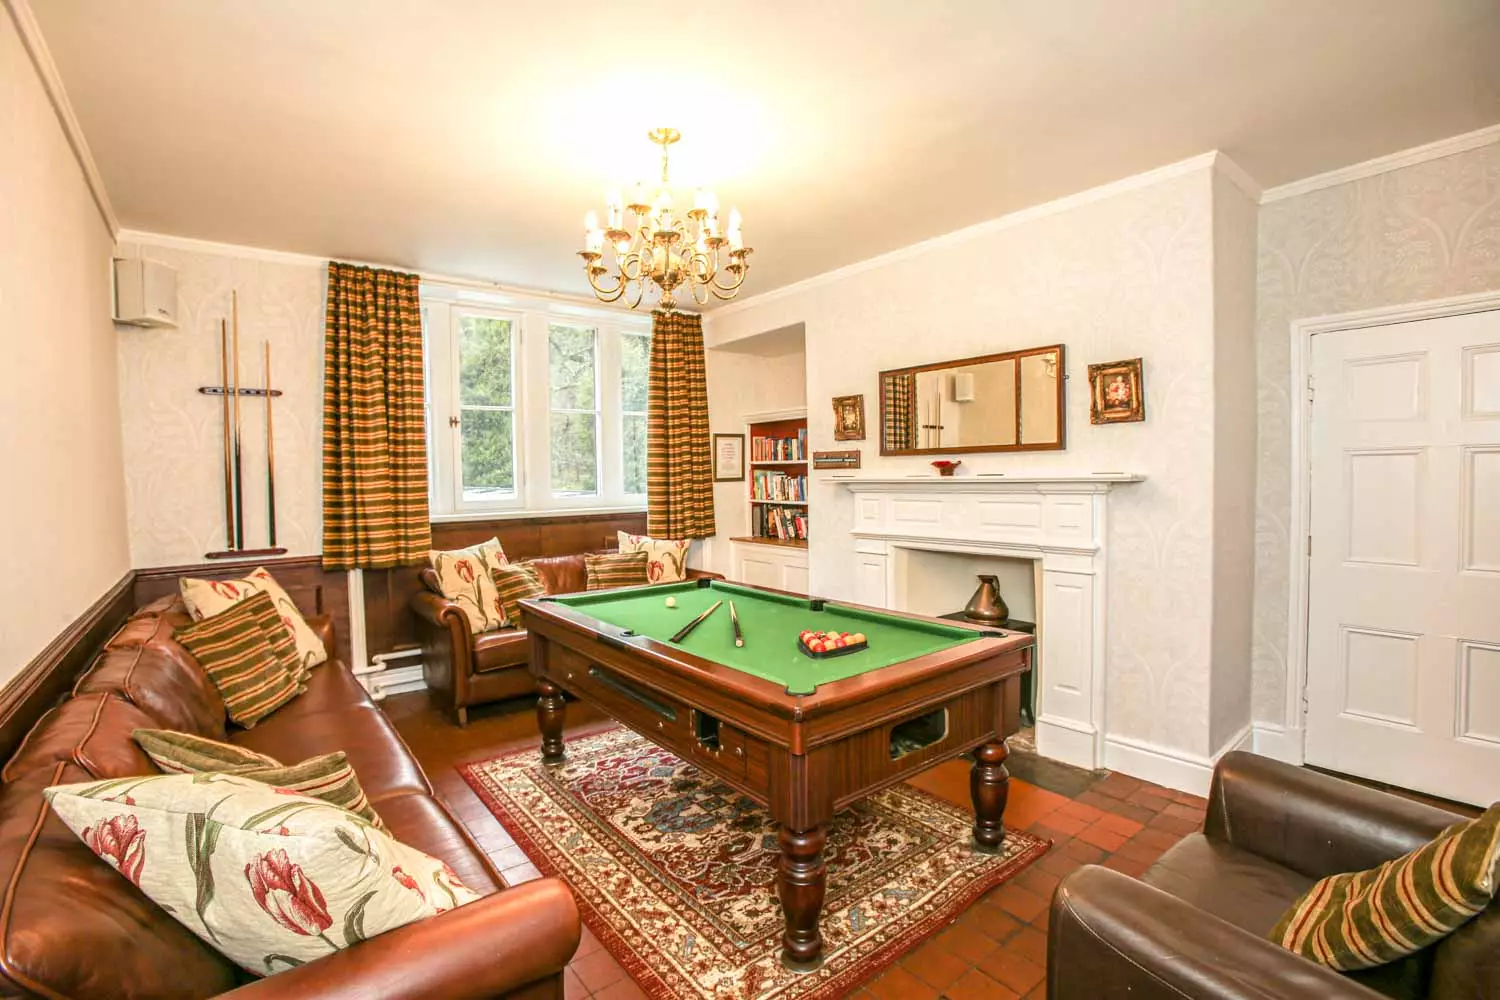 Lodge with games room uk